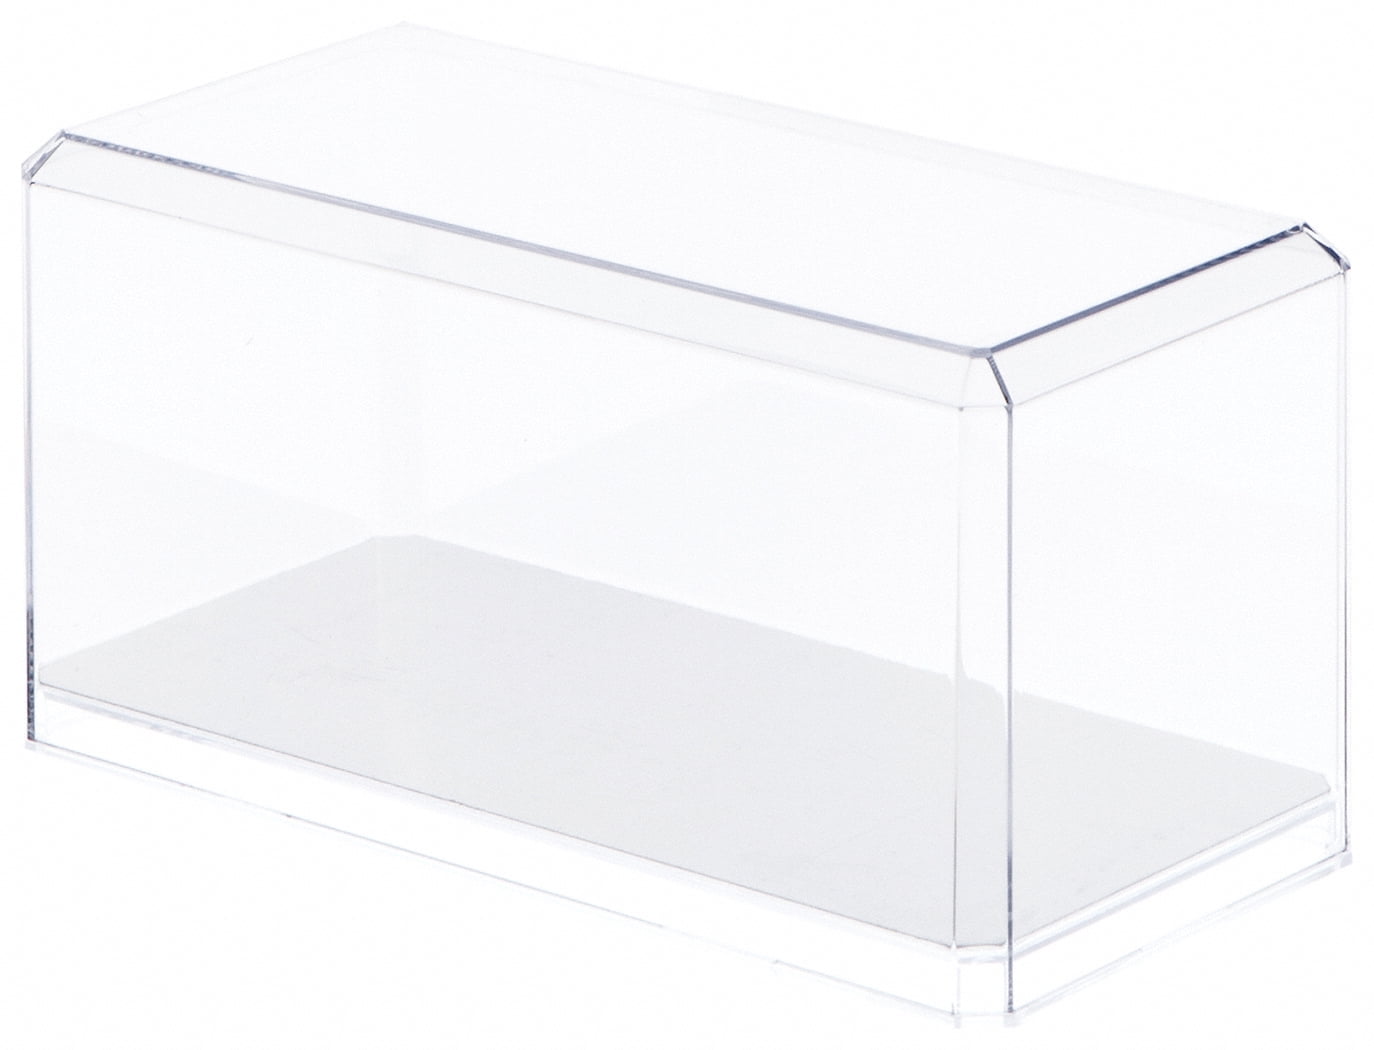 Pioneer Plastics Acrylic Case for 1:24 Scale Cars 9" x 4.375" x 4.125" 6 Pack 